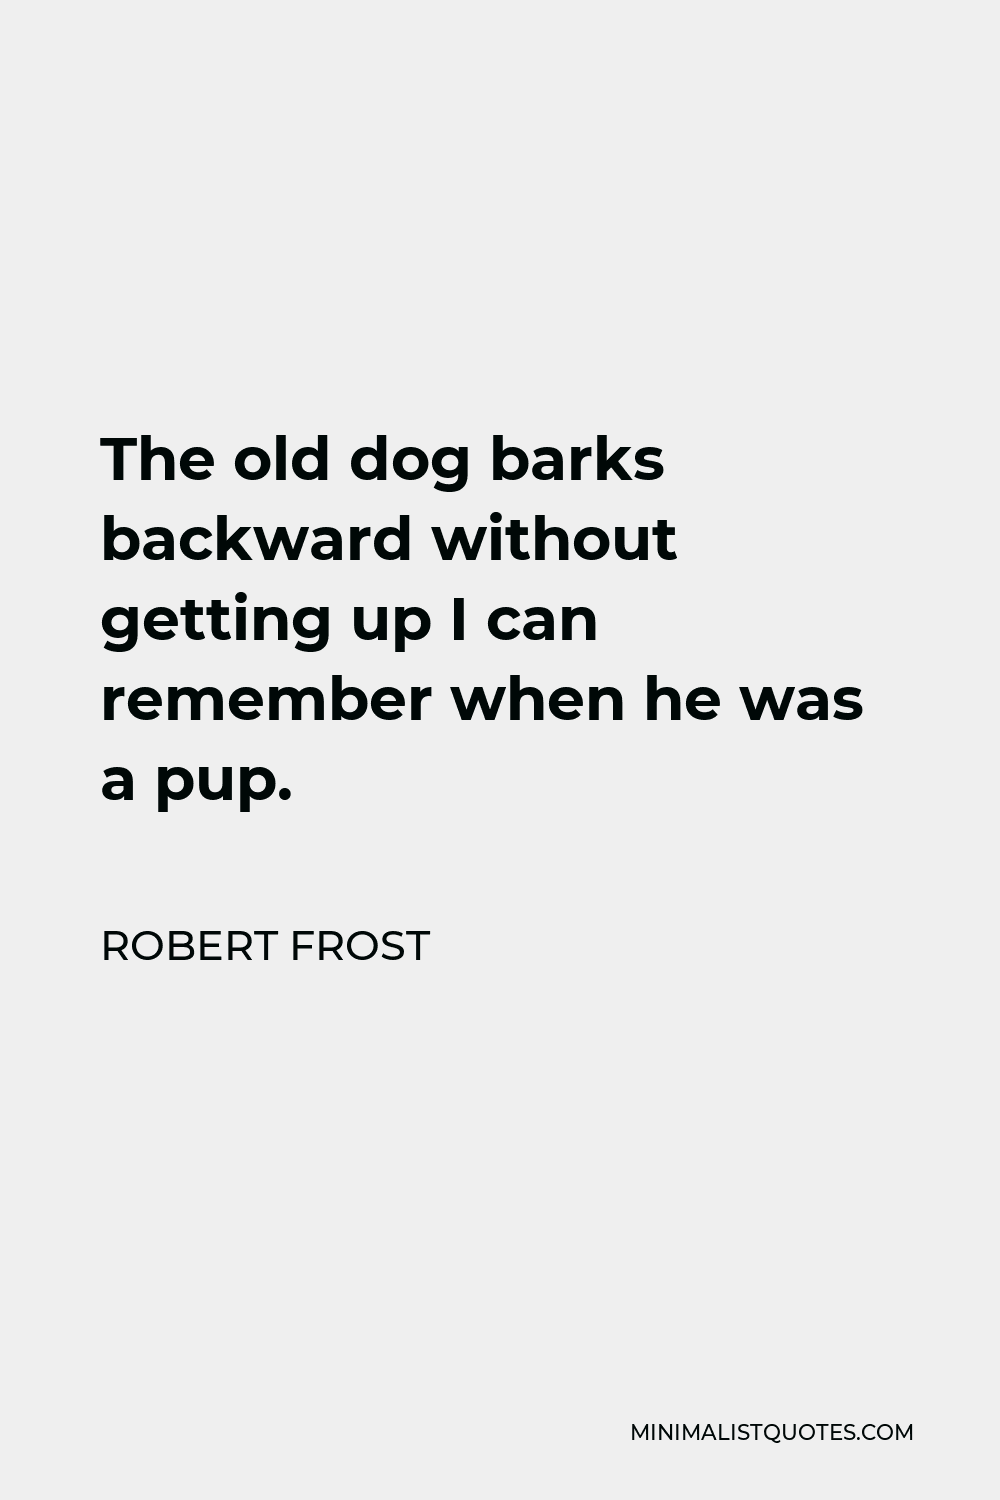 Robert Frost Quote - The old dog barks backward without getting up I can remember when he was a pup.